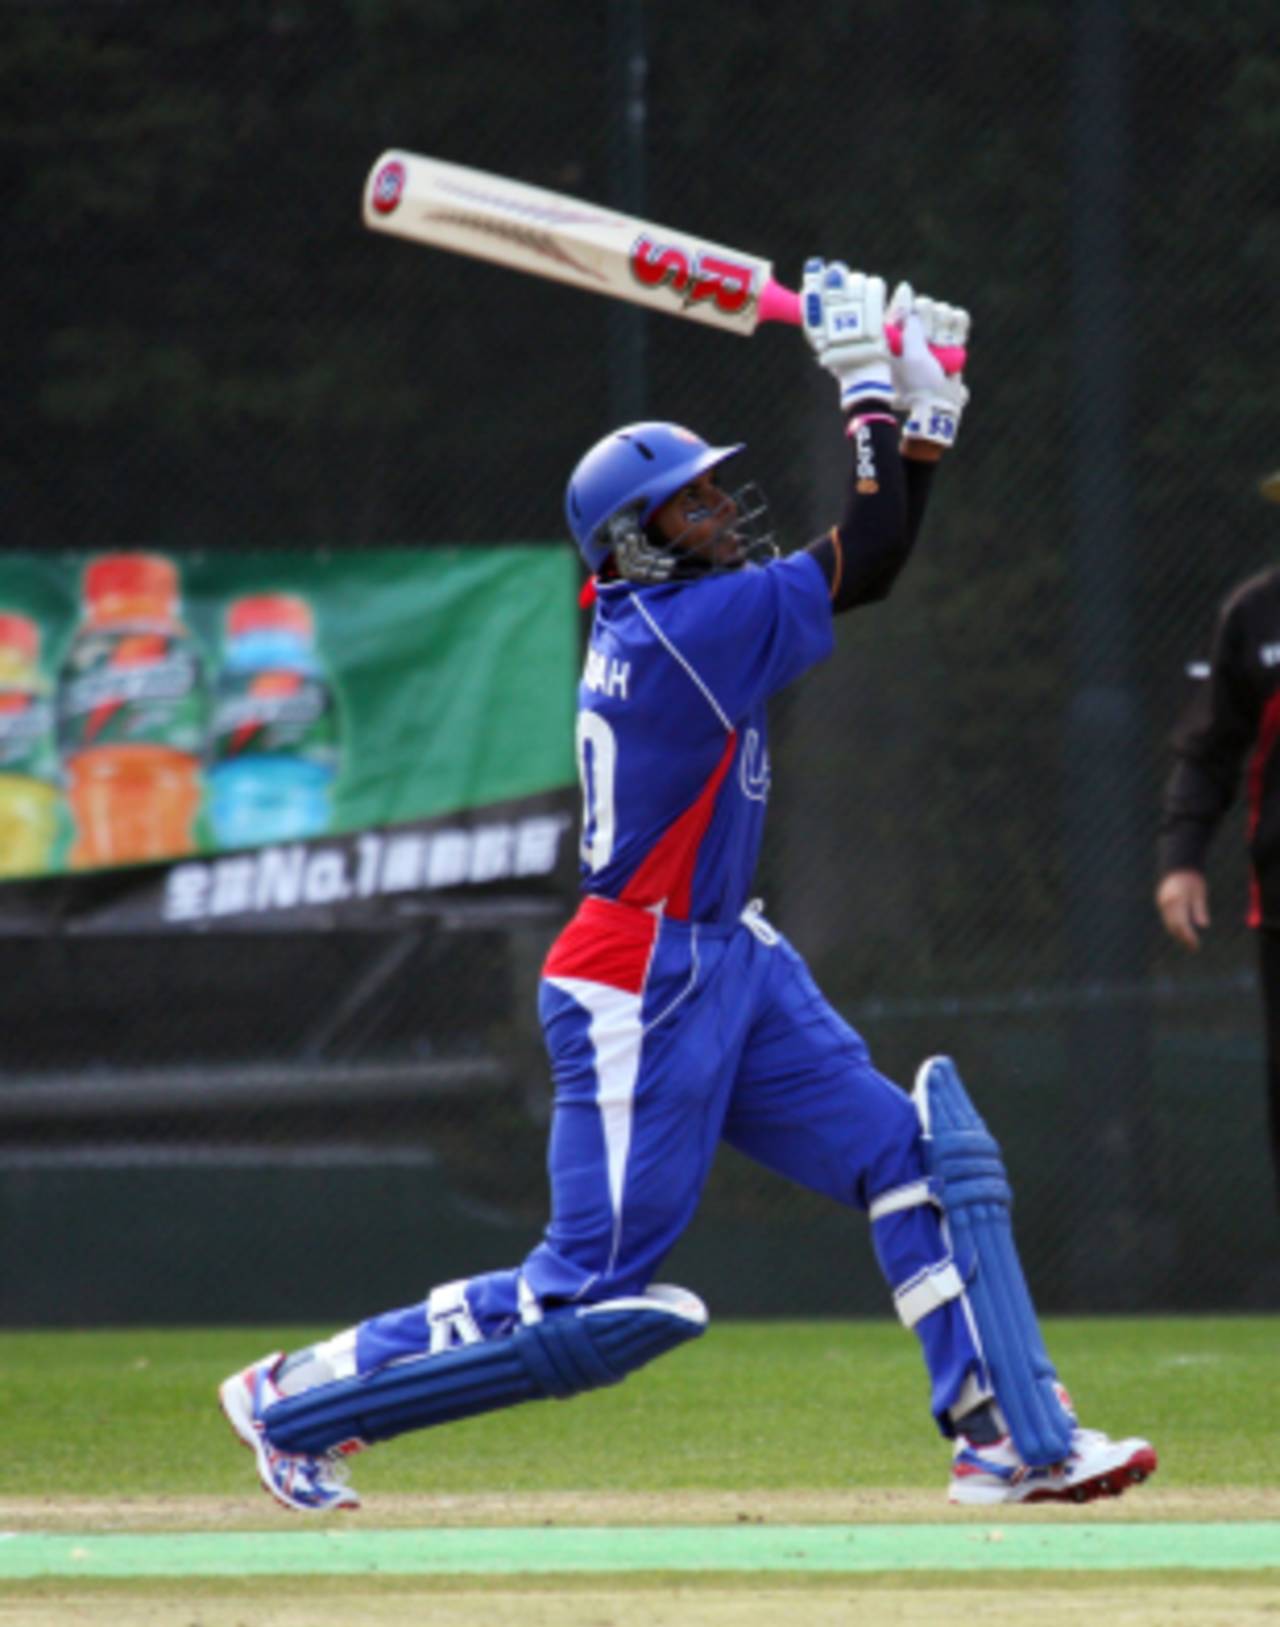 Steve Massiah smashes one of his sixes during his knock, Hong Kong v United States of America, WCL Div. Three, Kowloon, January 22, 2011